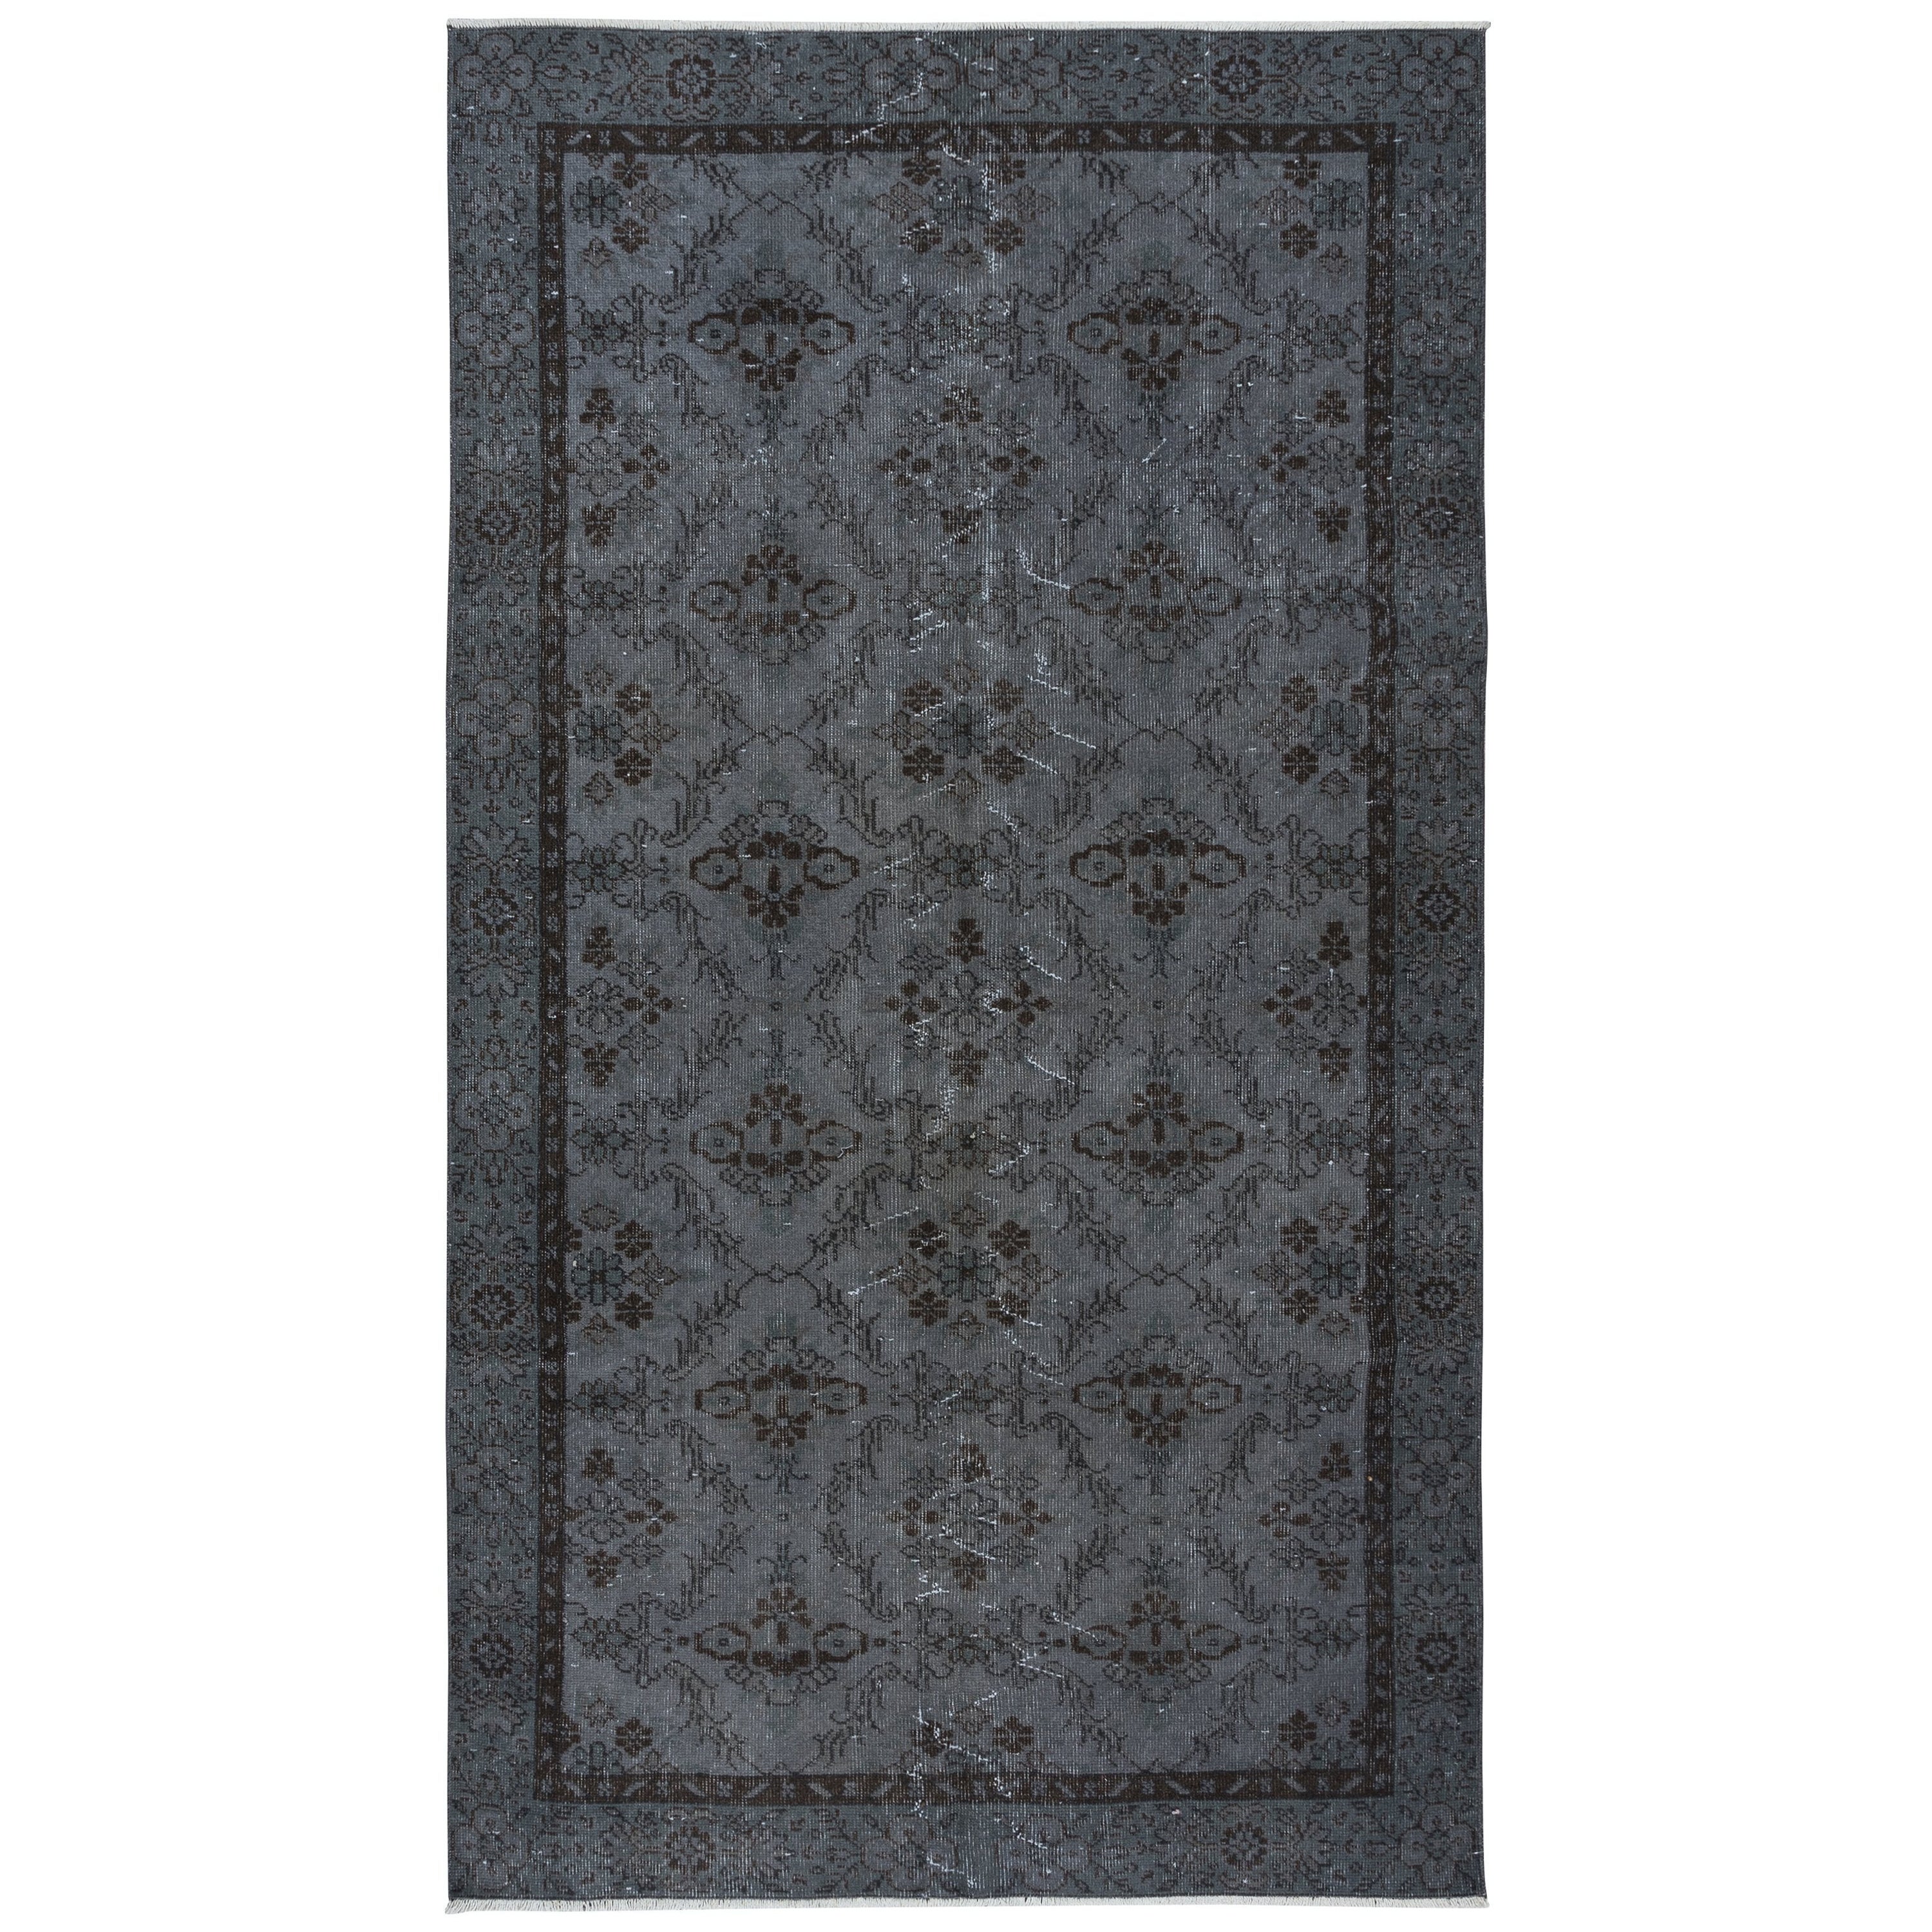 4.8x8.4 Ft Authentic Handmade Rug, Floral Pattern Upcycled Carpet in Pure Gray For Sale